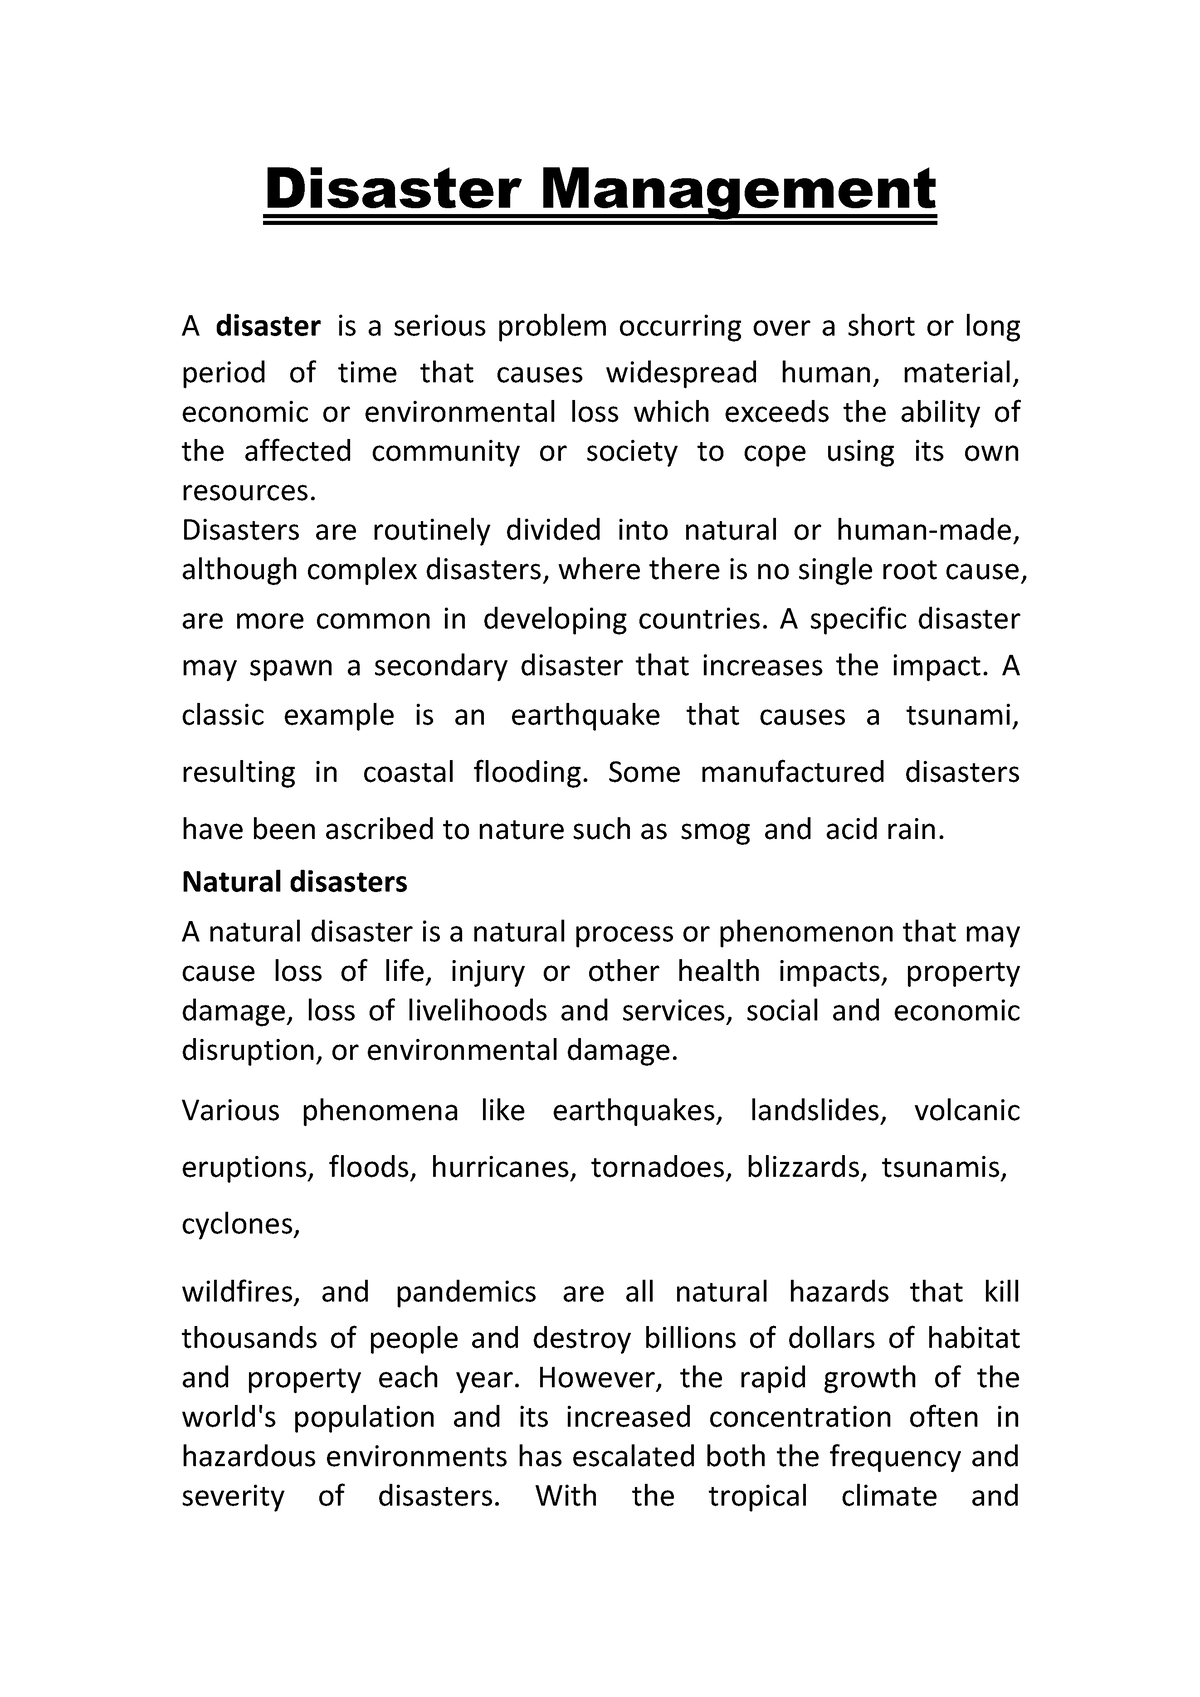 research questions on disaster management